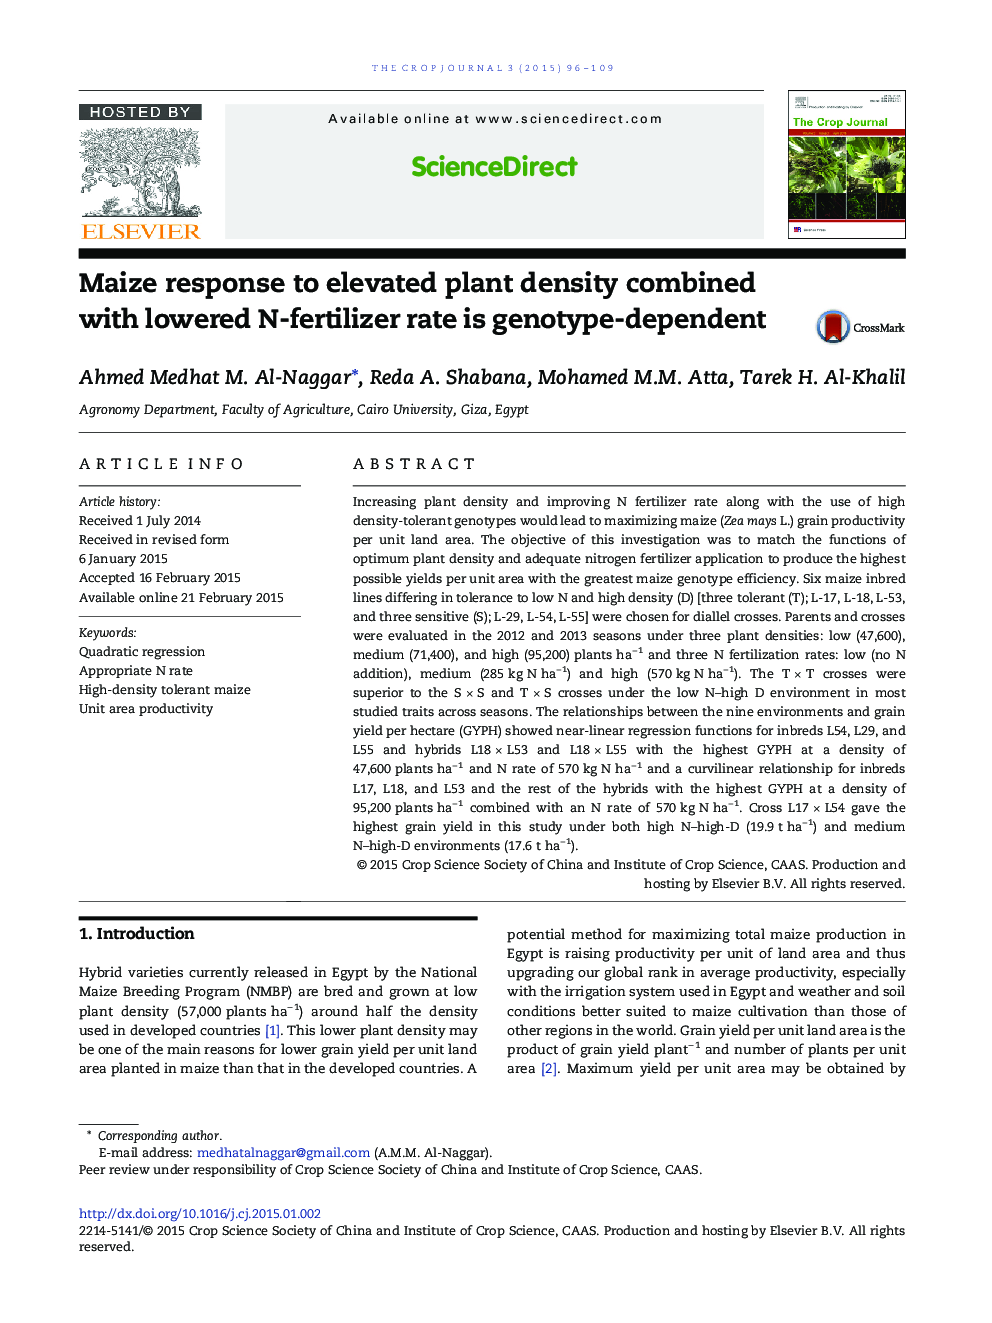 Maize response to elevated plant density combined with lowered N-fertilizer rate is genotype-dependent